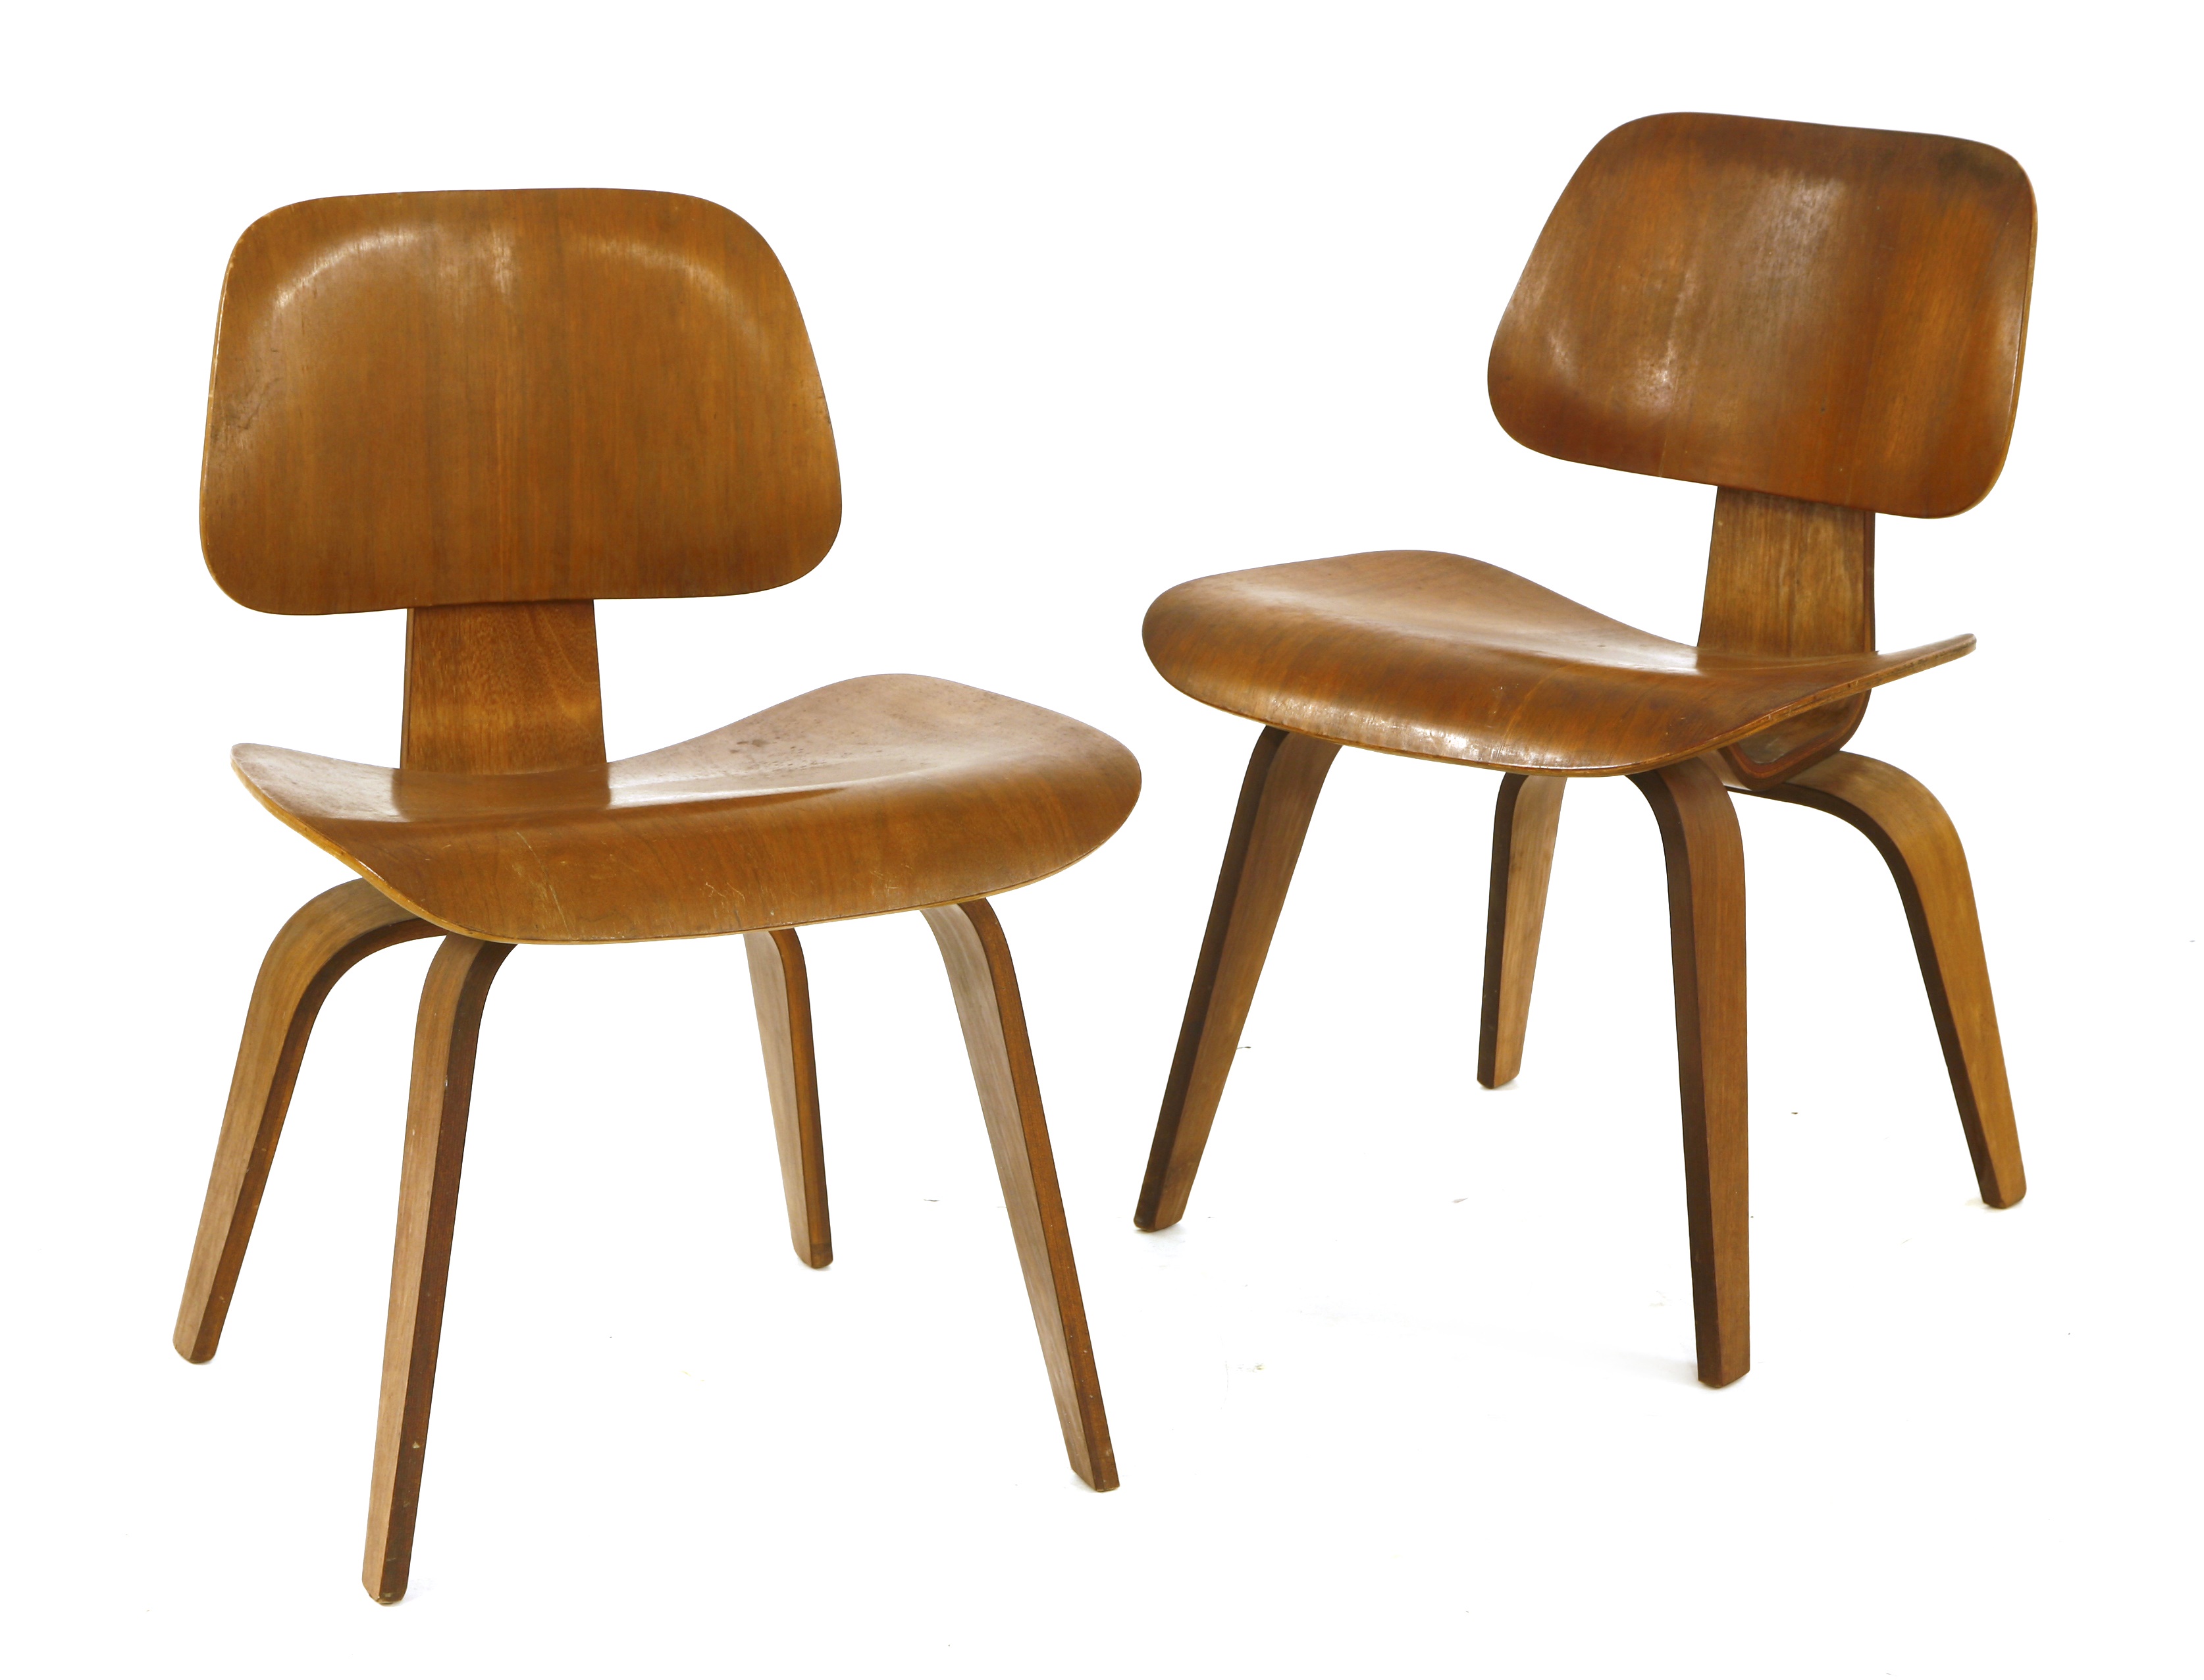 DCW chair, designed by Charles and Ray Eames for Herman Miller in 1946